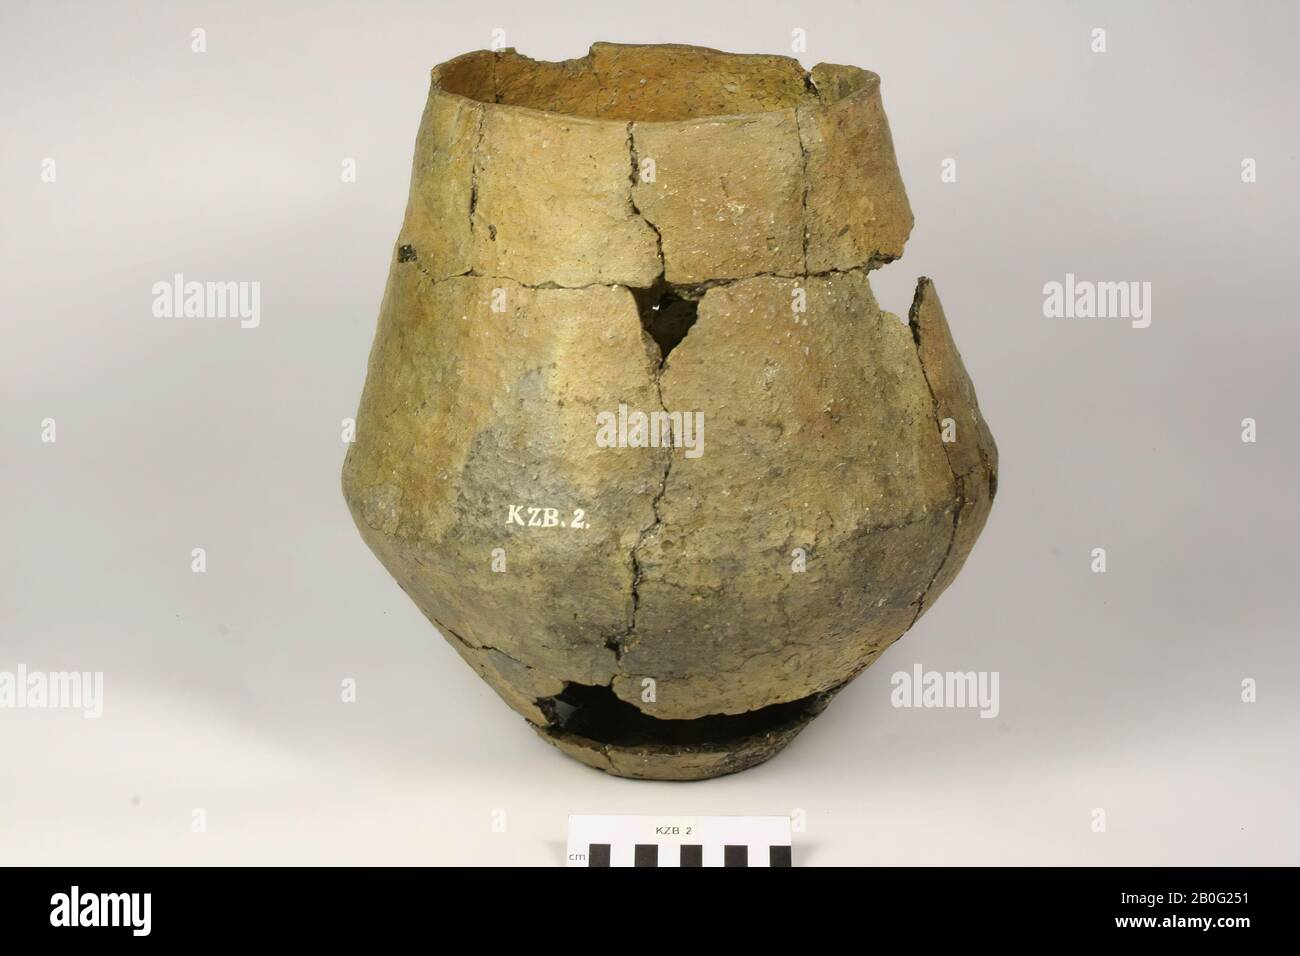 Large Proto-Saxon urn of earthenware of capricious model, rough piece, filled with bones. Old bonding, gaps ni the wall. KZB 5., urn, pottery found here, h: 33.5 cm, diam: 31.5 cm, prehistory -1200 Stock Photo